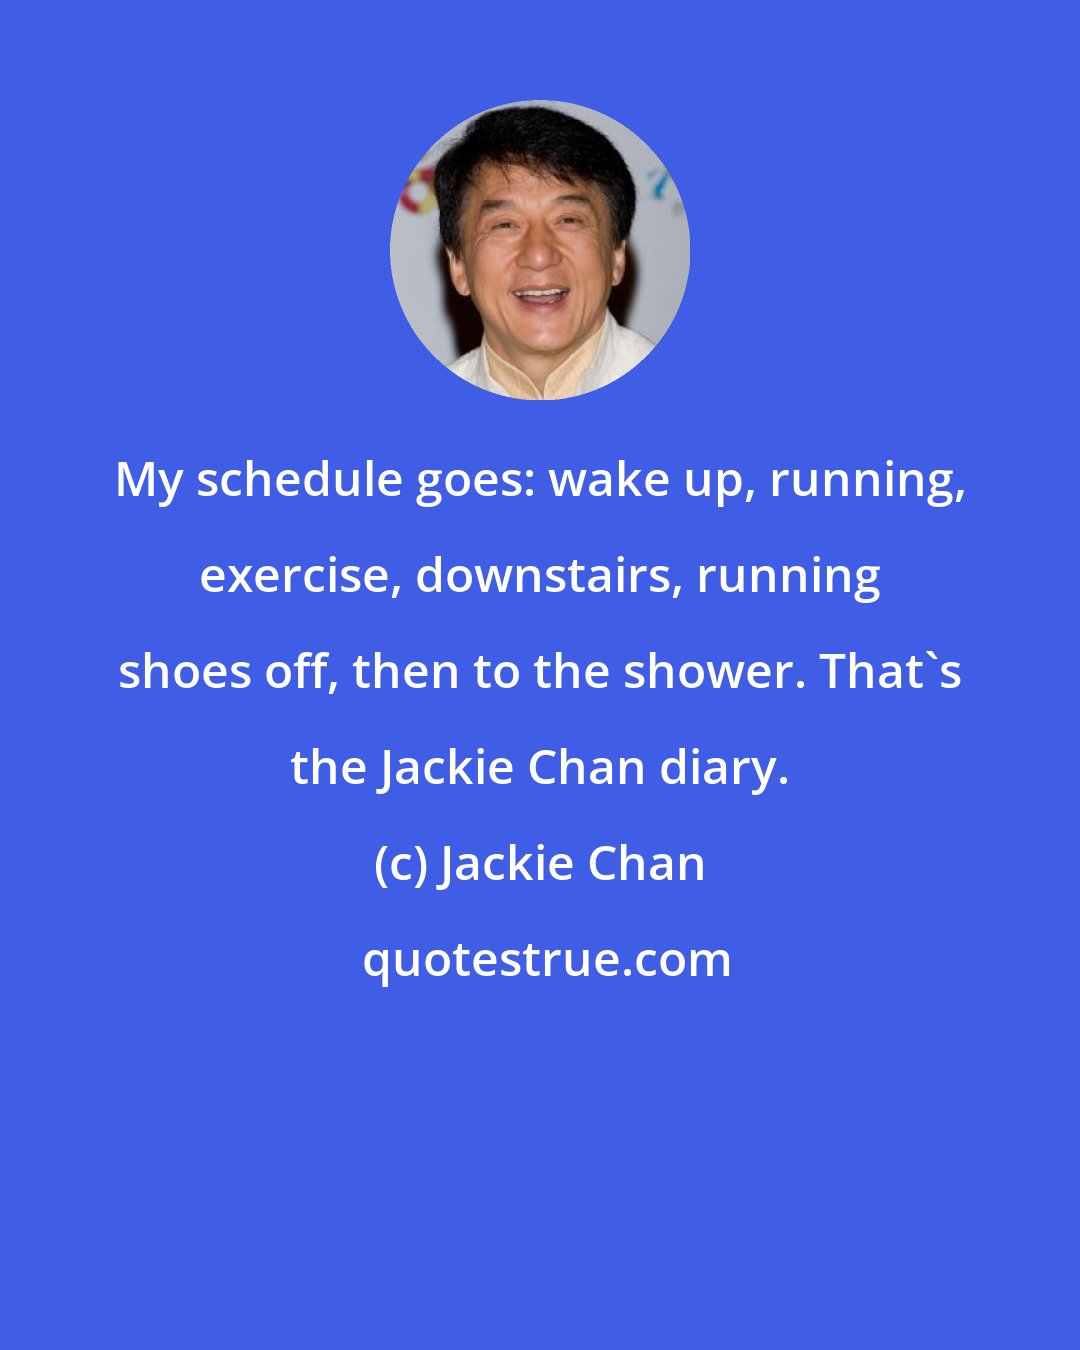 Jackie Chan: My schedule goes: wake up, running, exercise, downstairs, running shoes off, then to the shower. That's the Jackie Chan diary.